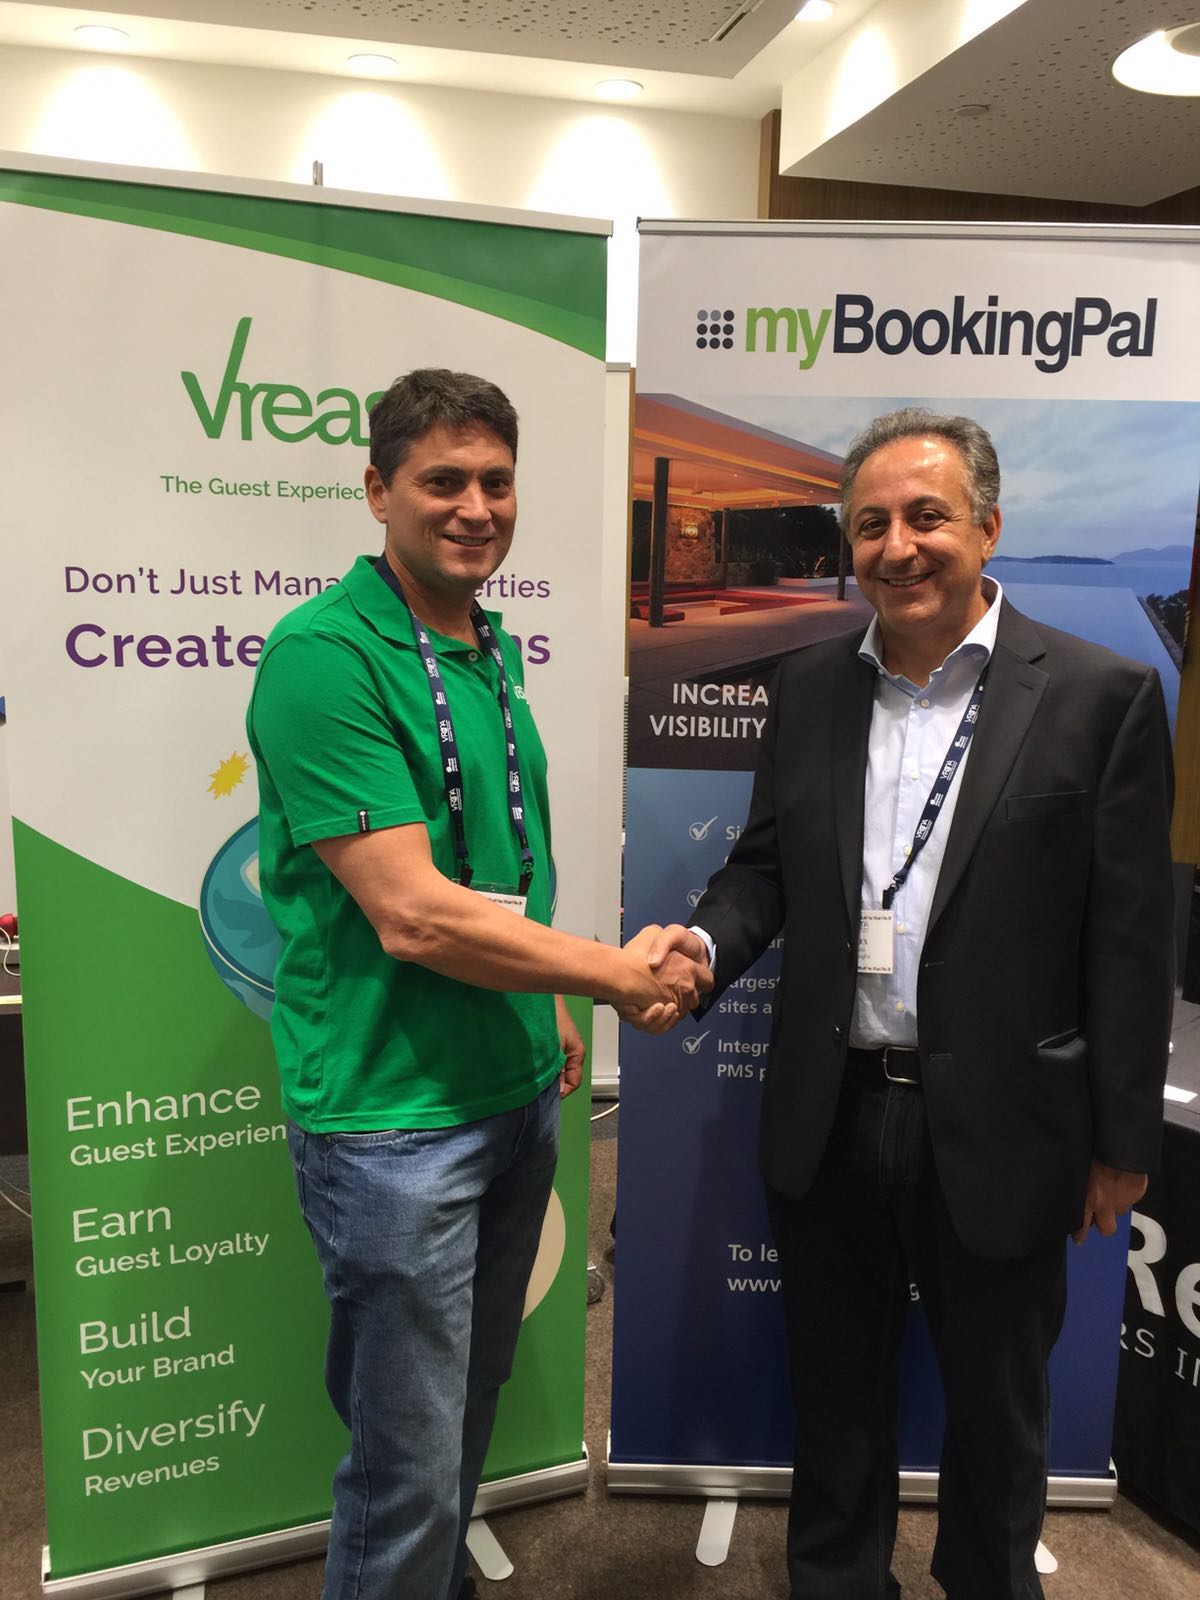 From left to right: Martin Picard CEO and Founder of Vreasy, Alex Aydin CEO and Founder of myBookingPal.